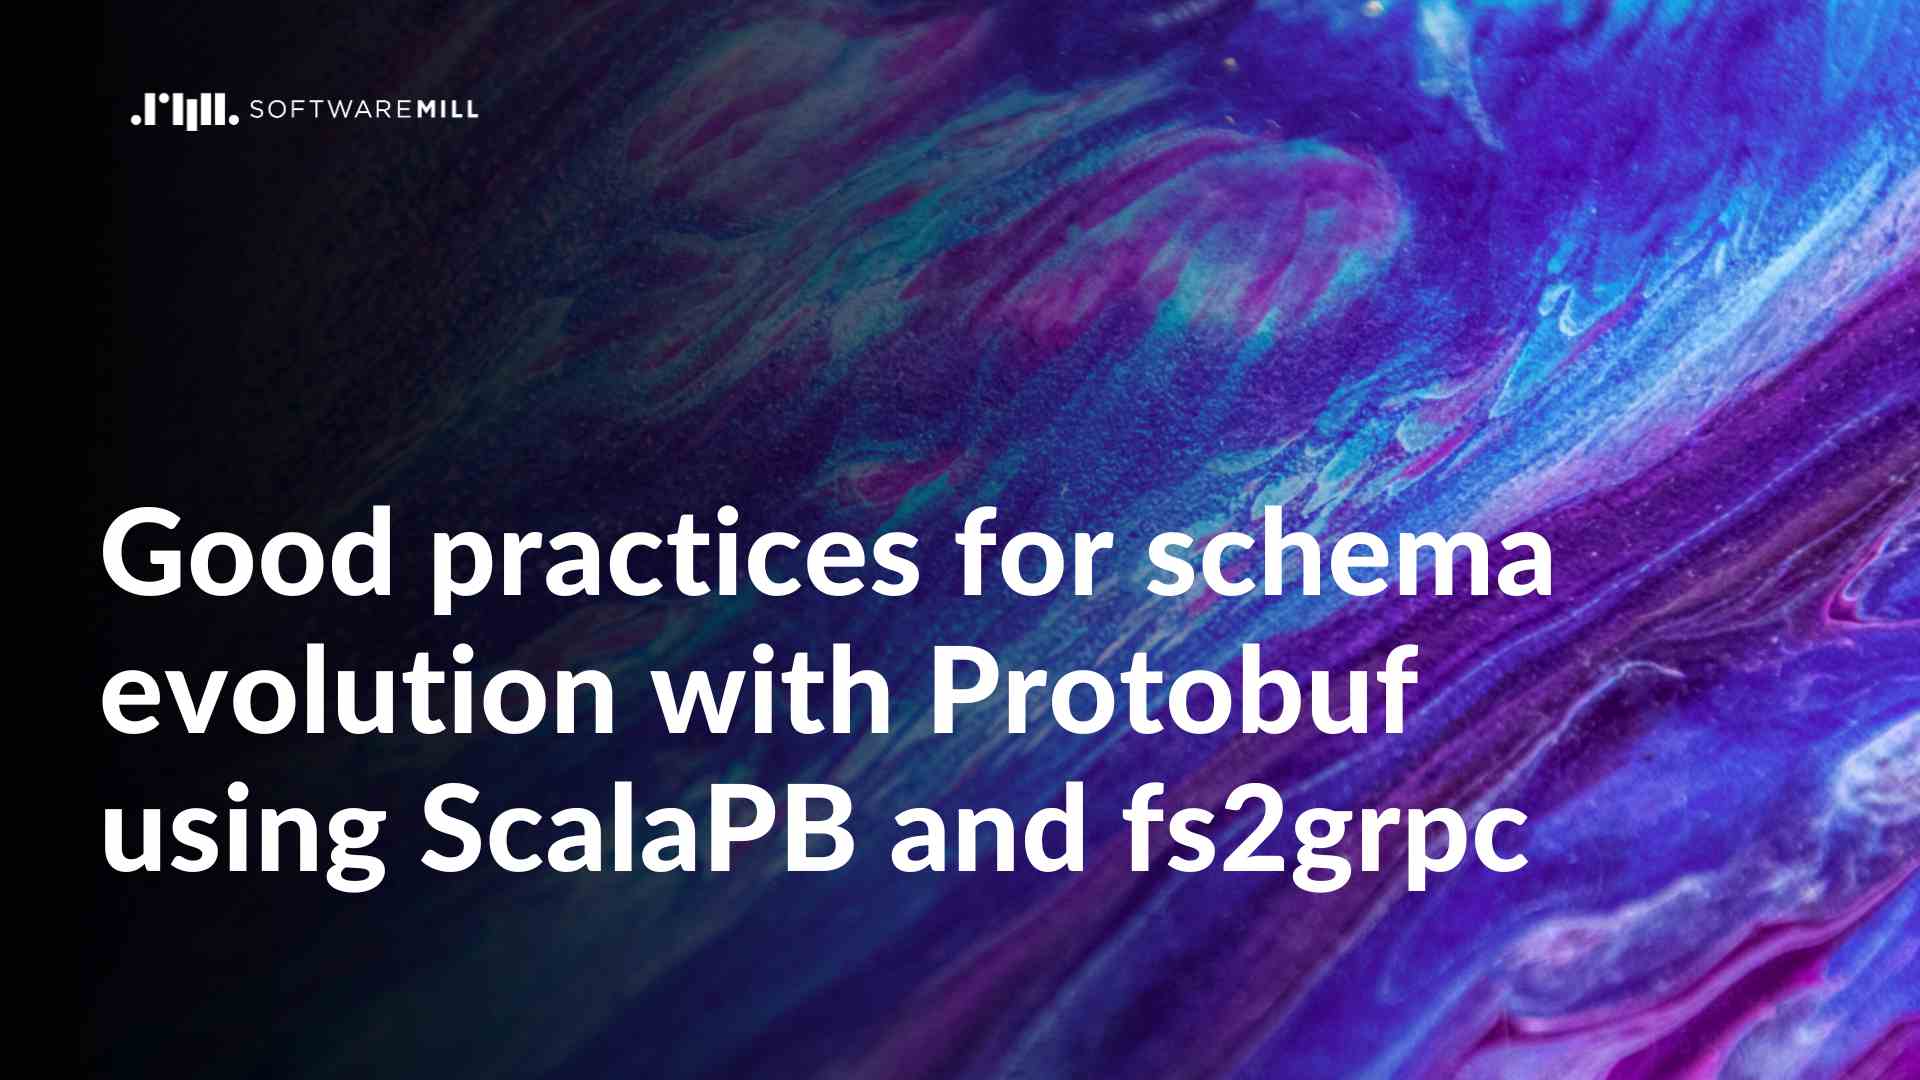 Good practices for schema evolution with Protobuf using ScalaPB and fs2grpc webp image